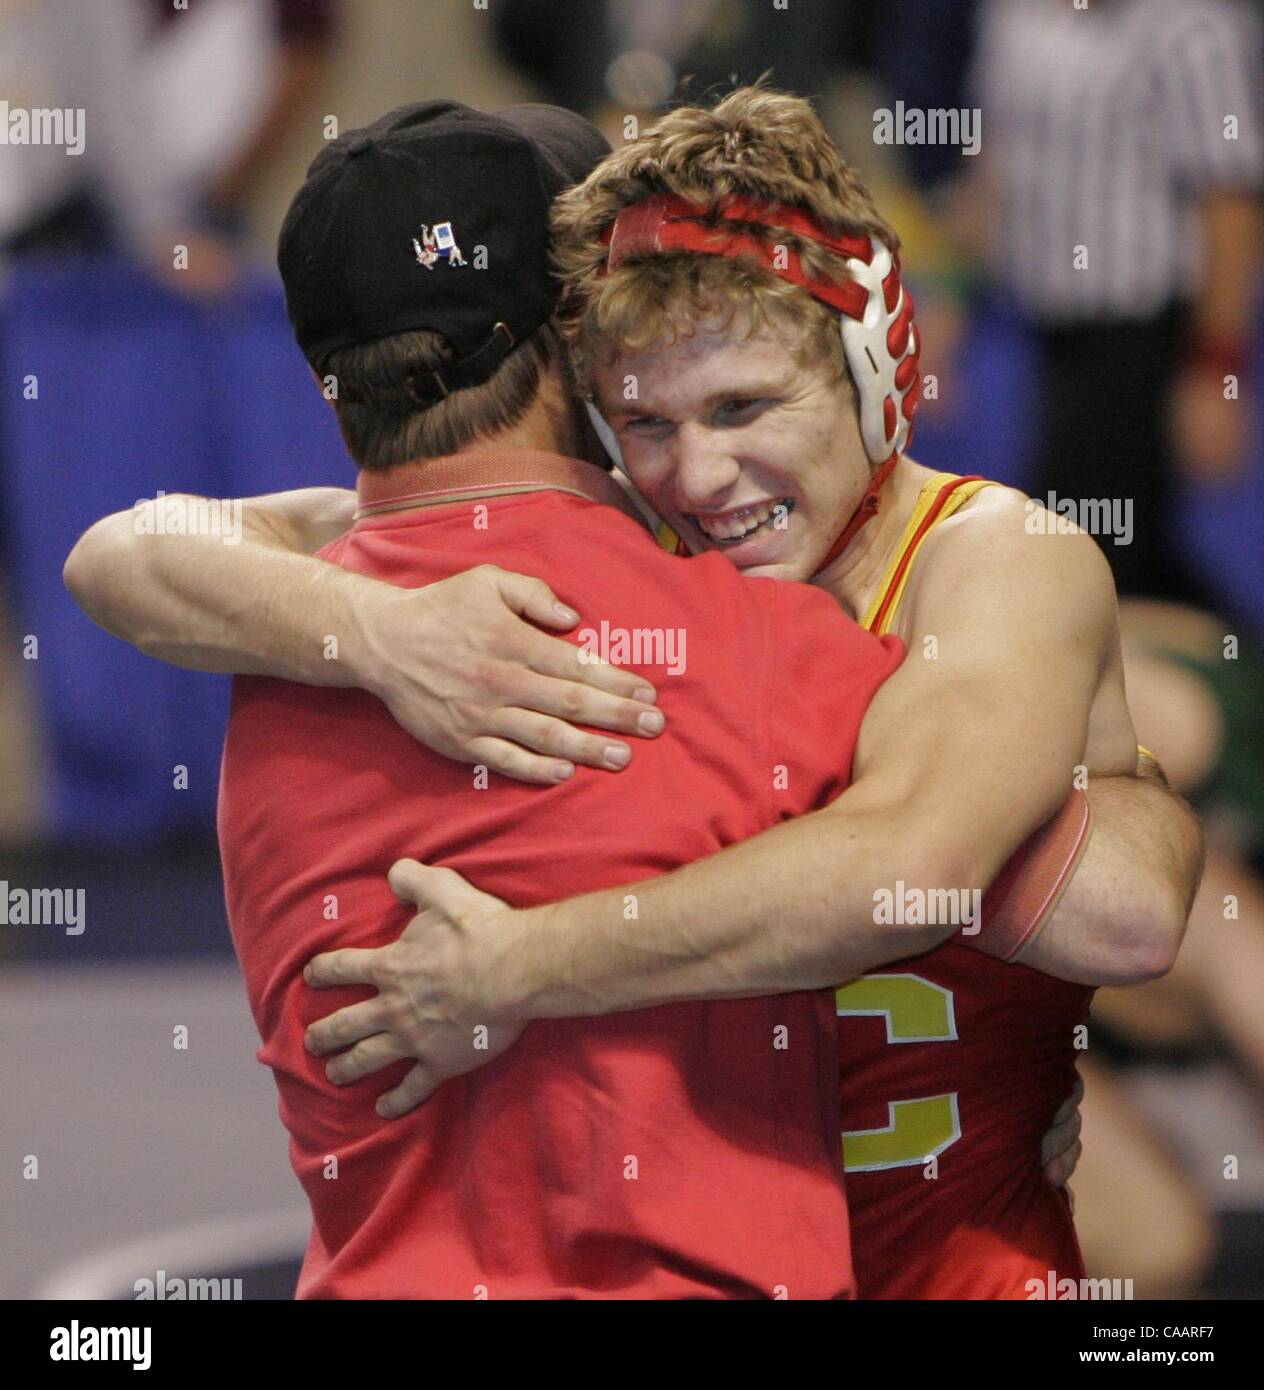 (Published 3/10/2005, NC-7, NI-7) Mt. Carmel's 145 lb. TODD McKAY hugs JOSE CAMPO, one of his coaches, after his consolation match victory over Anthony Box, of Bakersfield High School, 7 to 4.  U/T photo CHARLIE NEUMAN Stock Photo